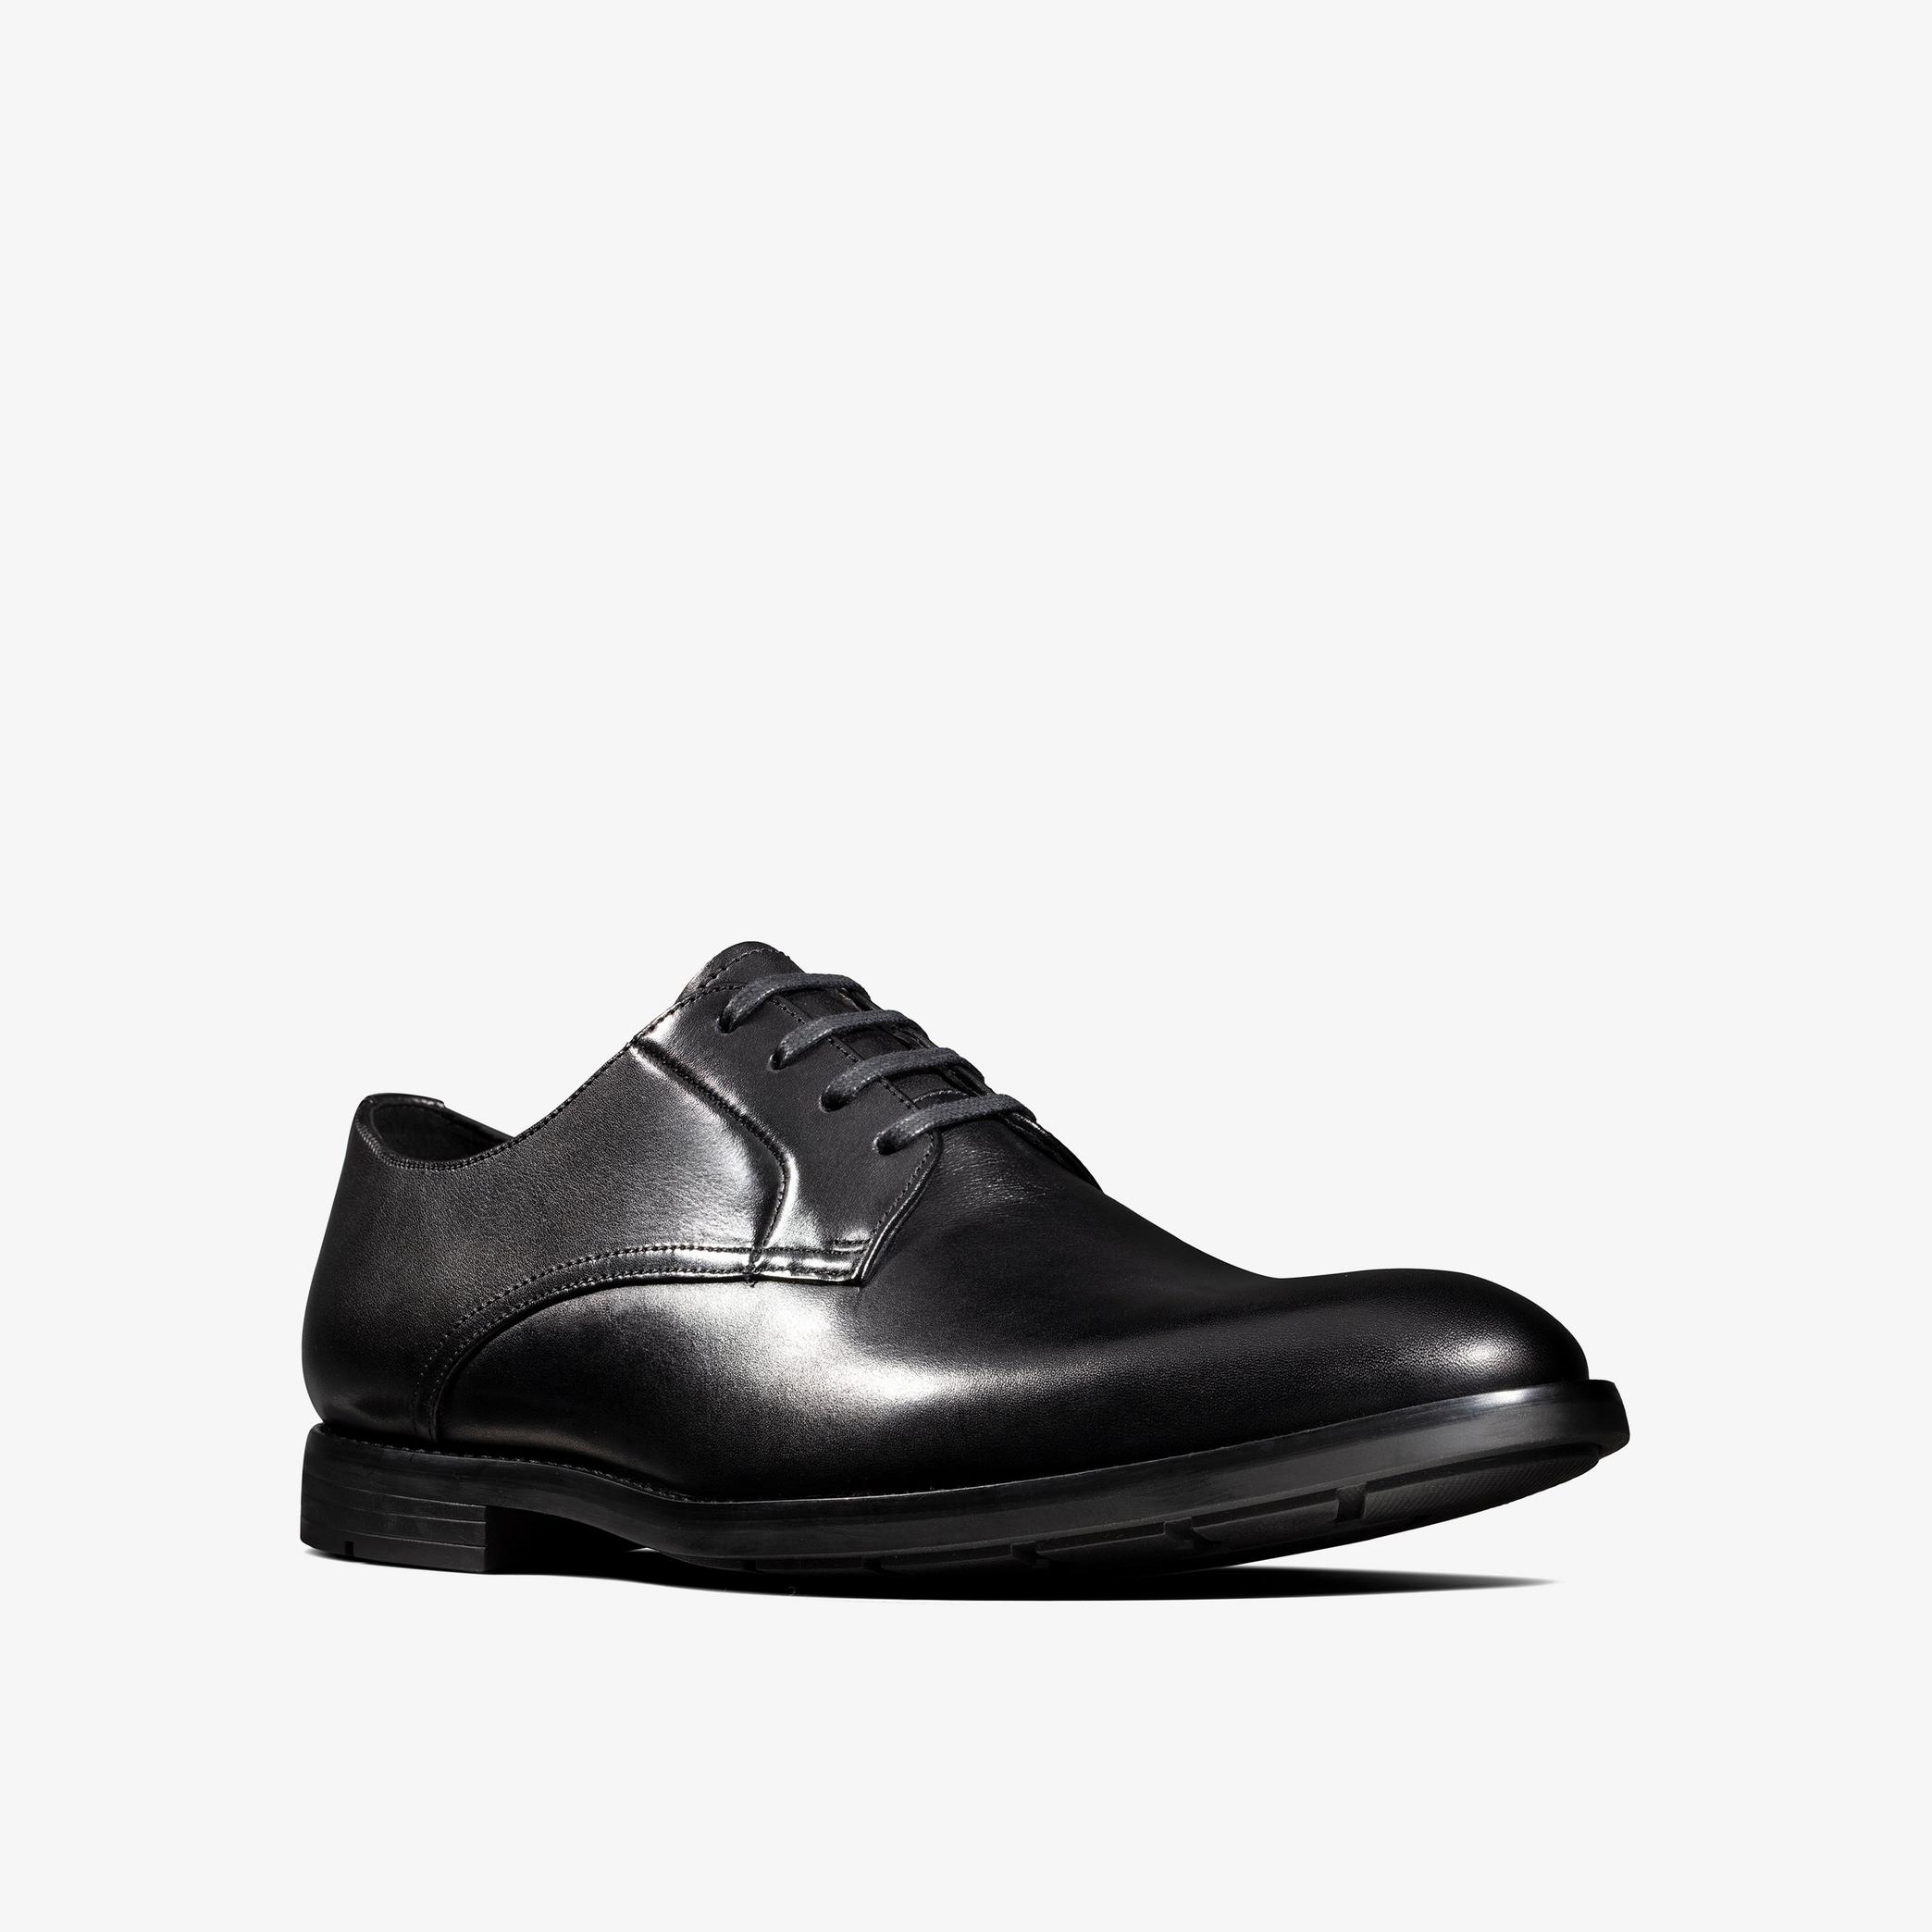 Ronnie Walk Black Leather Derby Shoes, view 3 of 6